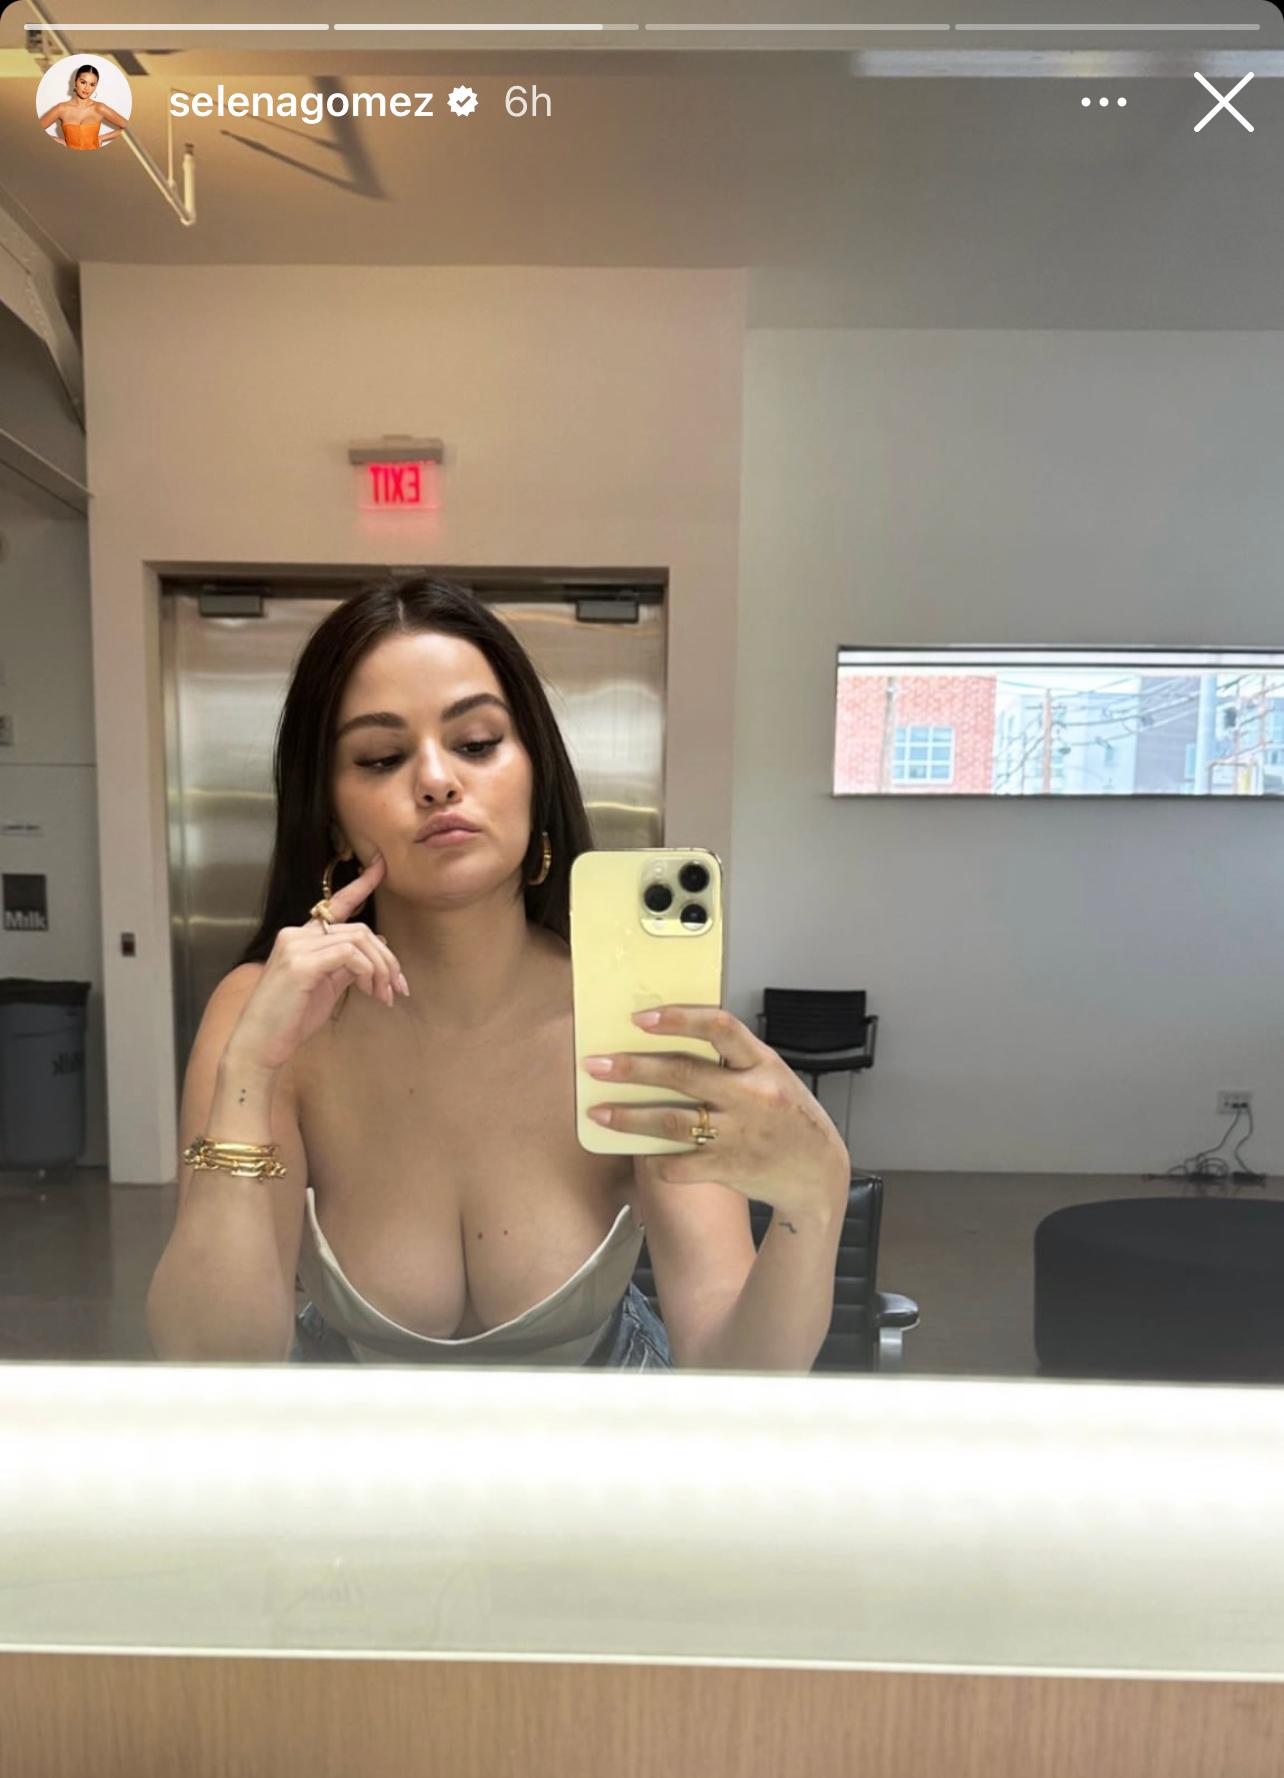 Selena Gomez Looks Radiant As She Puts Up Bursty Display In New Snaps